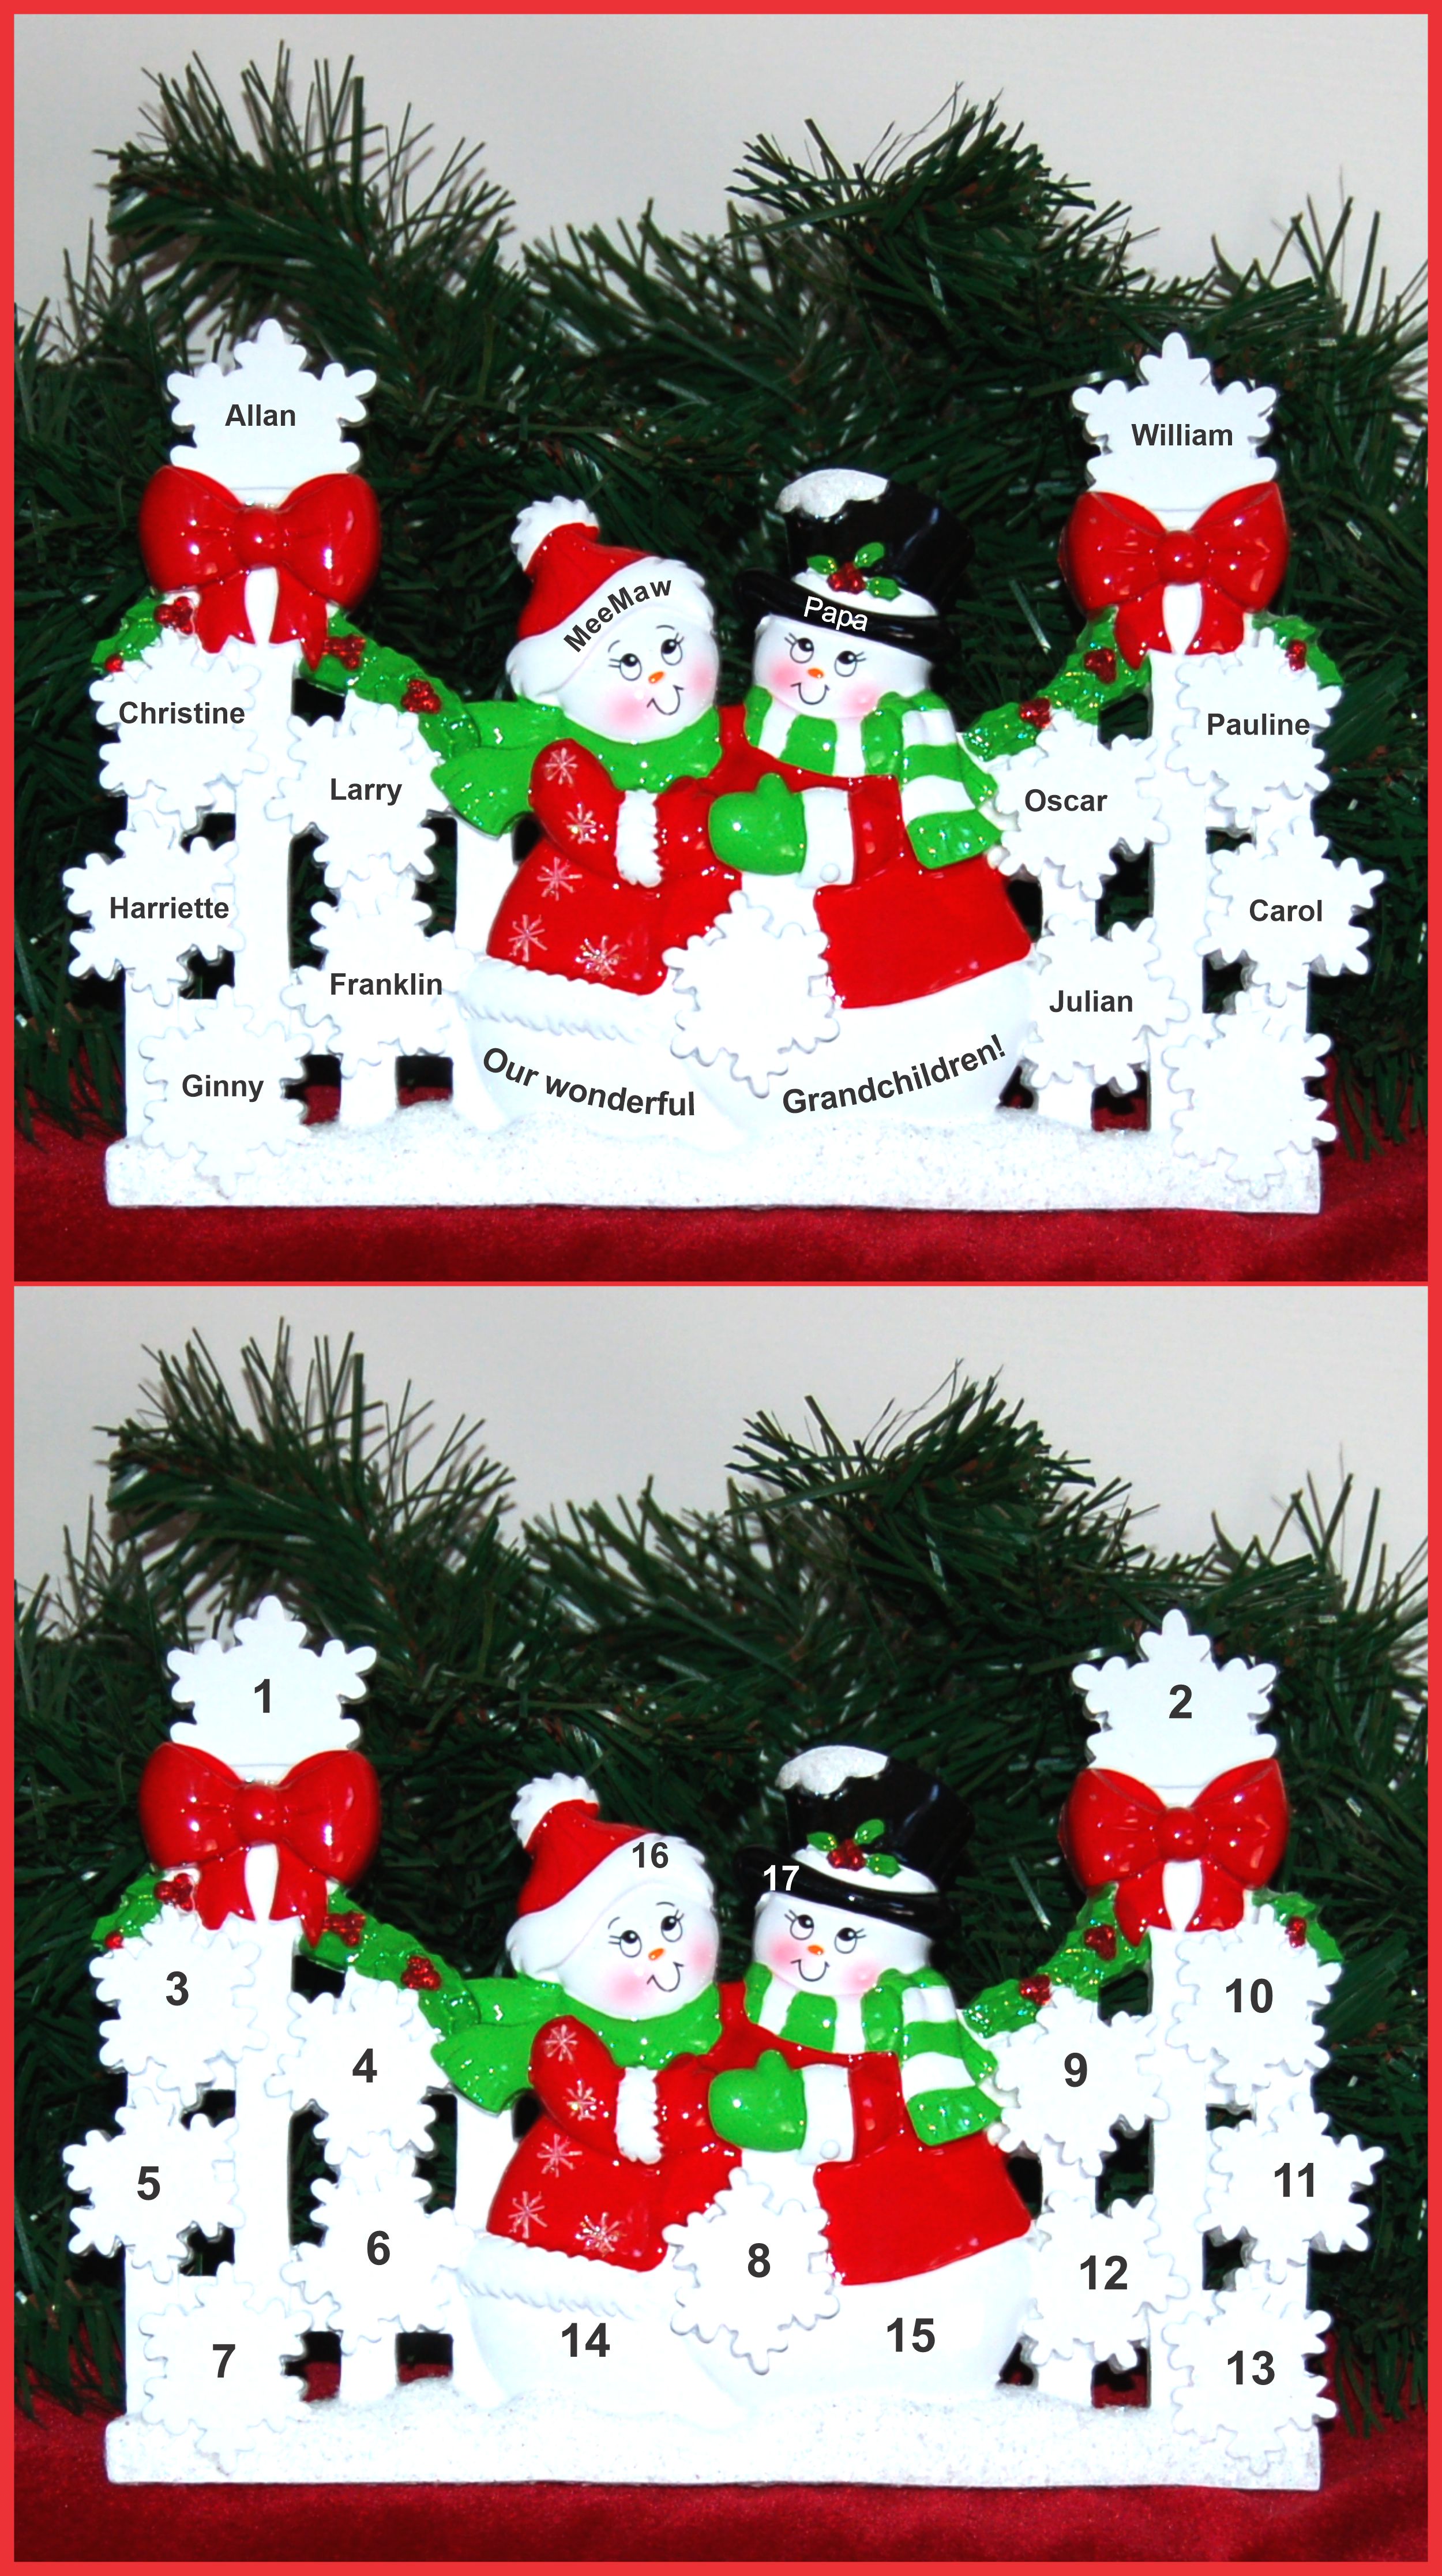 Personalized Grandparents Tabletop Christmas Decoration Snowflakes for 11 Grandchildren by Russell Rhodes